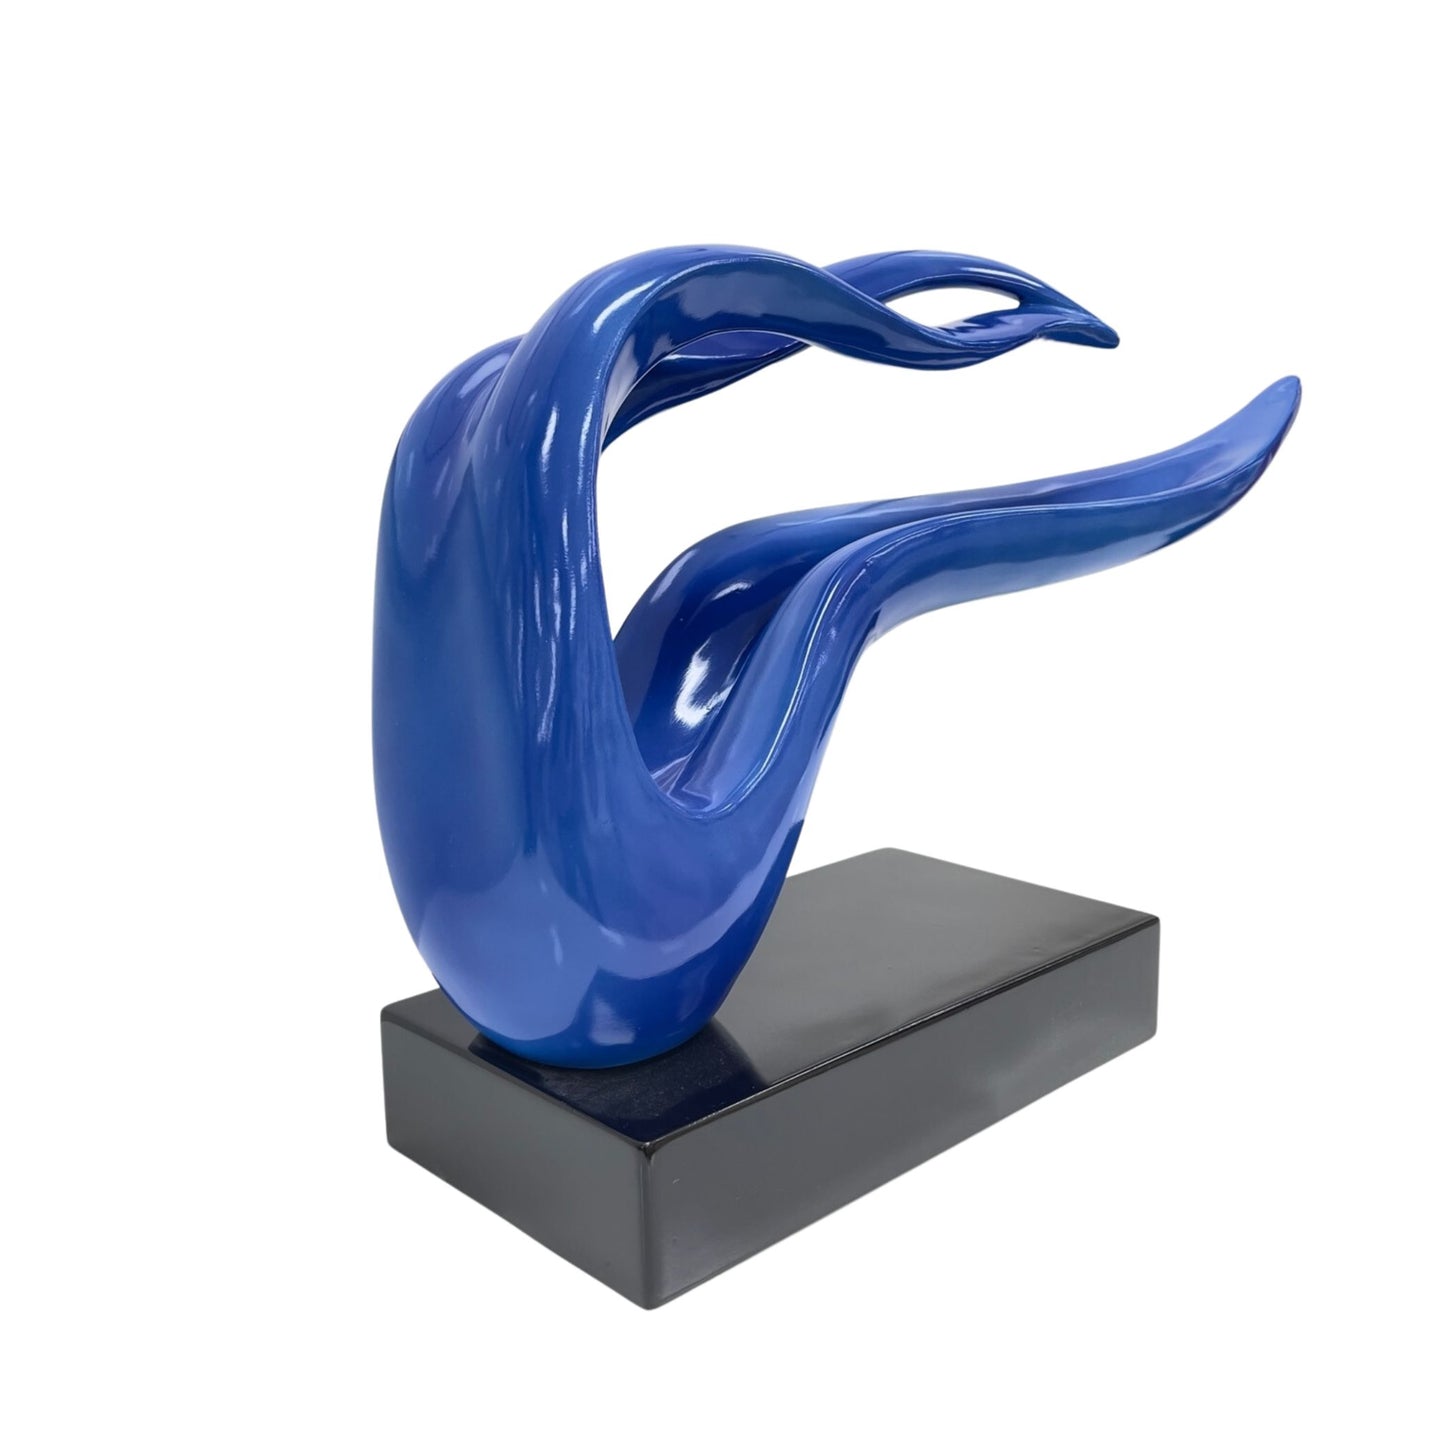 RAALS Abstract Ribbon Statue in Blue